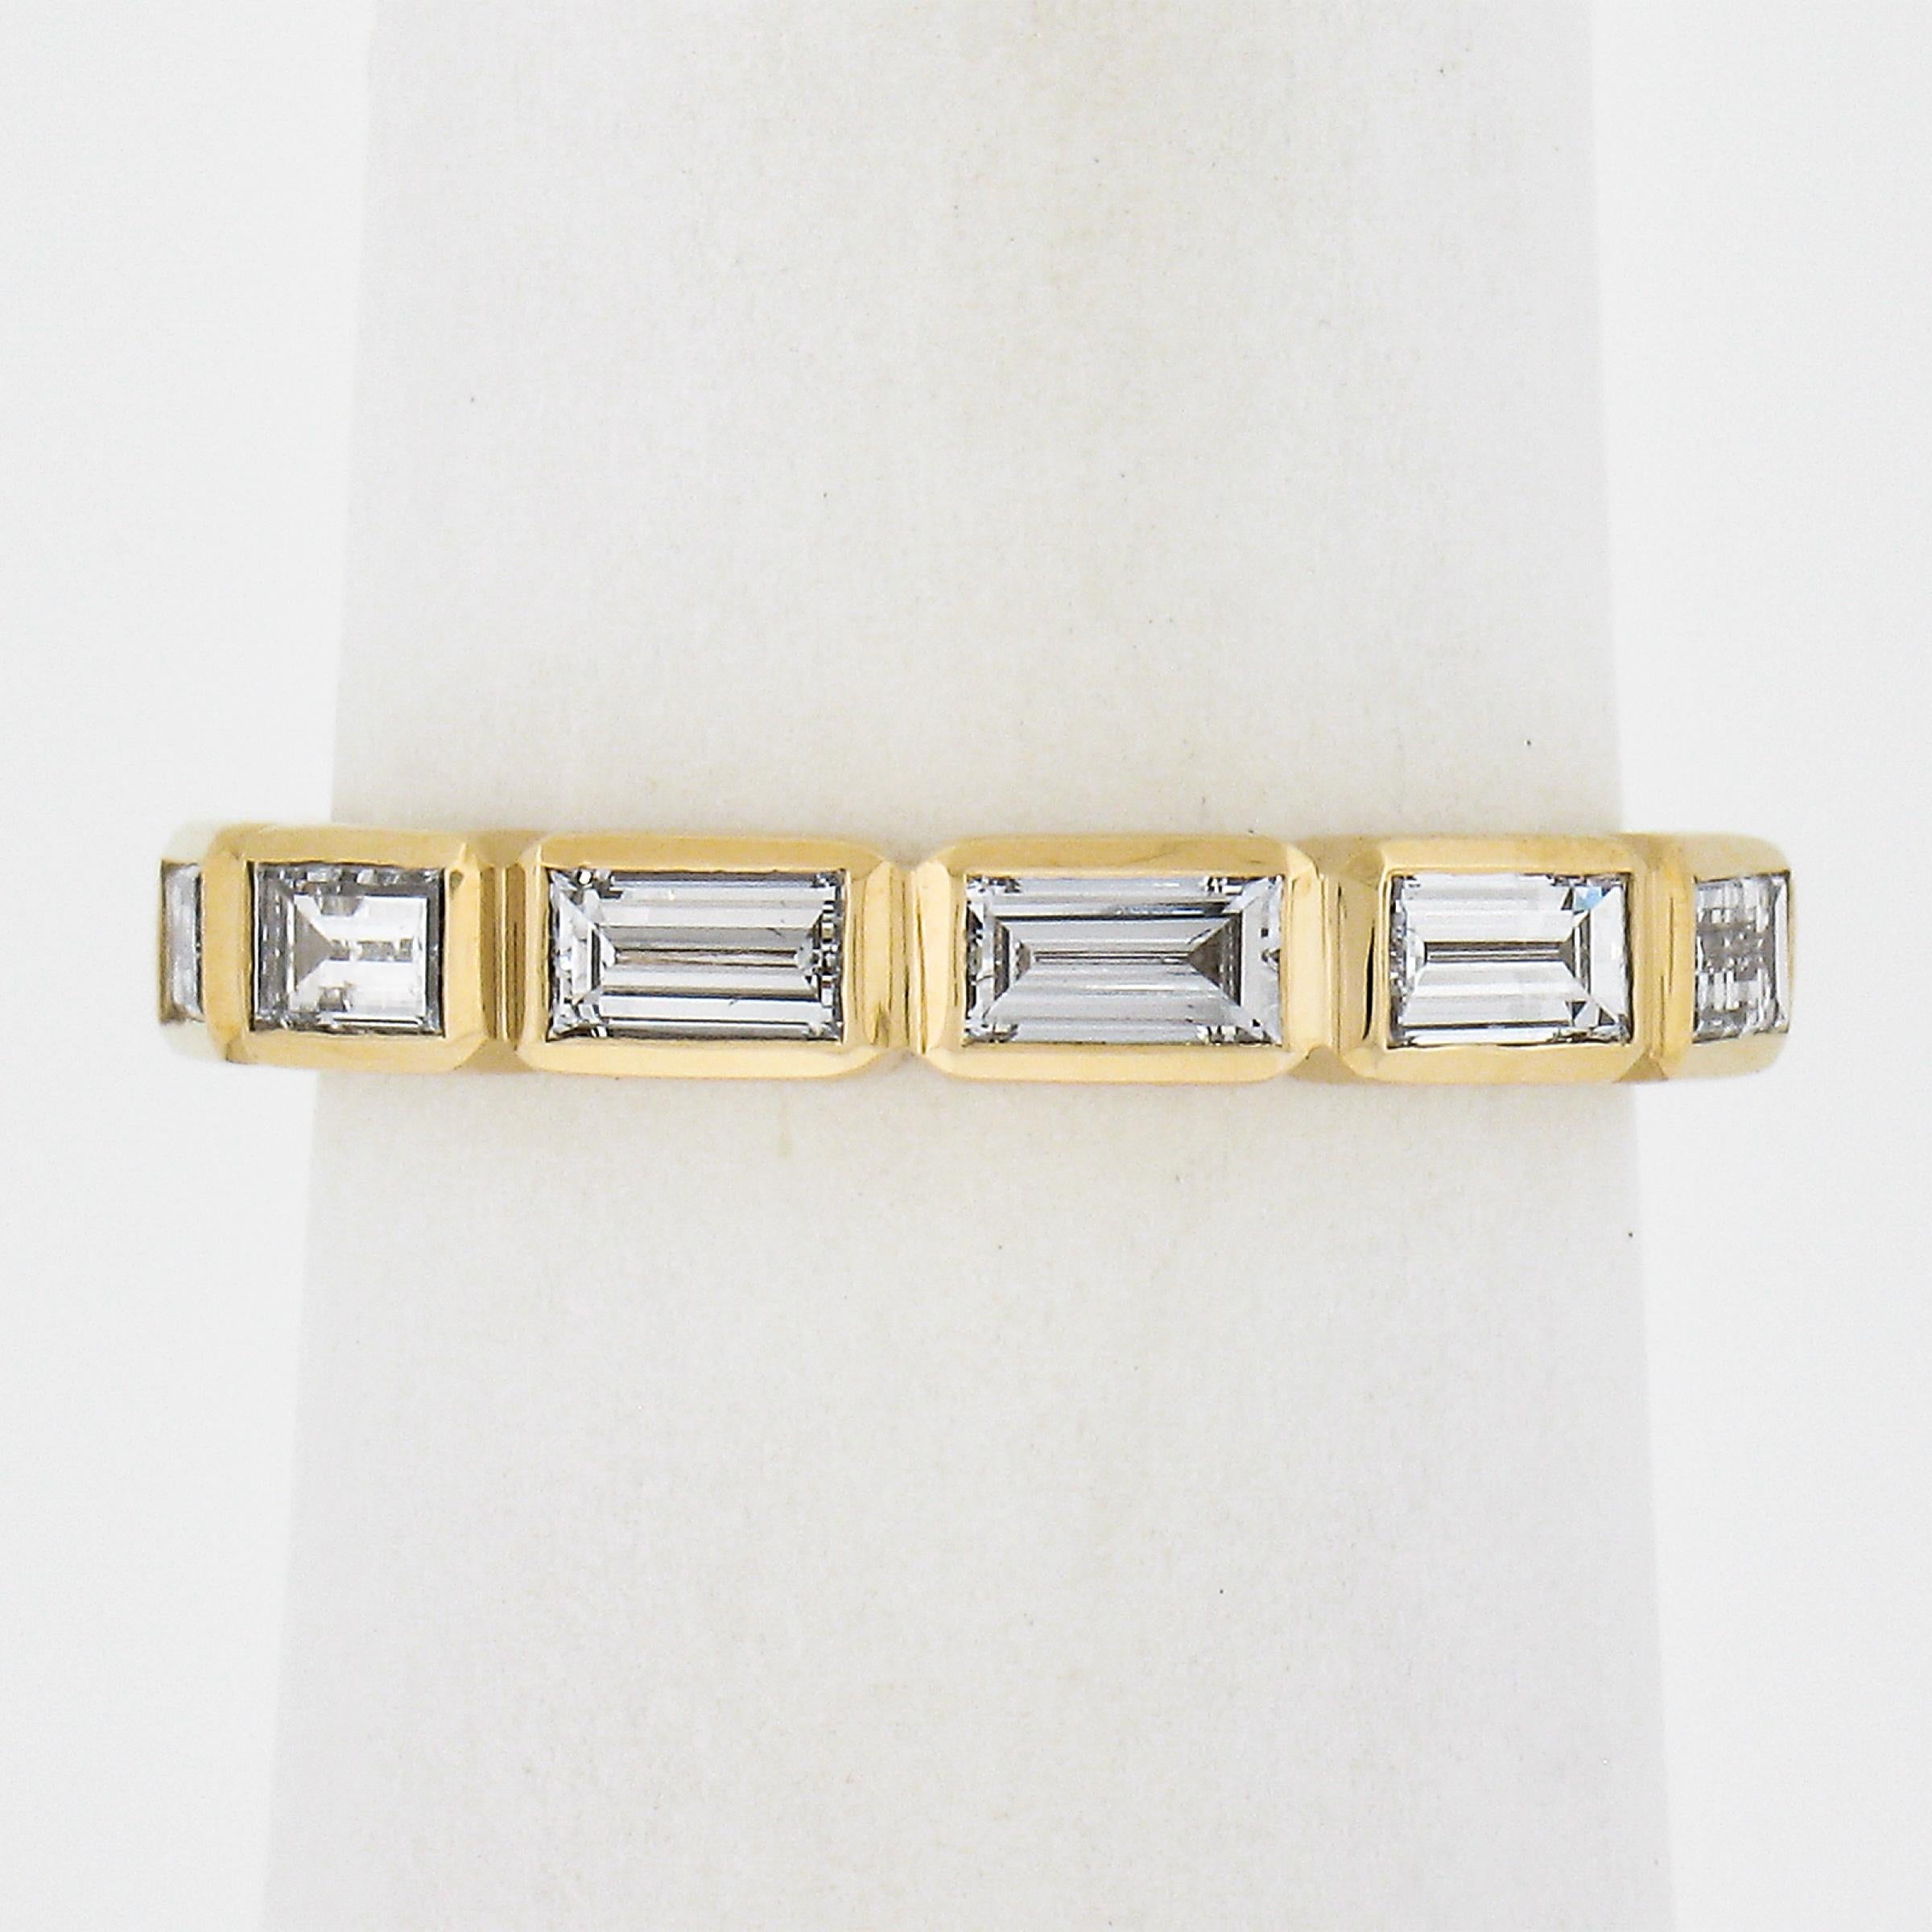 --Stone(s):--
(7) Natural Genuine Diamonds - Straight Baguette Cut - Bezel Set - G/H Color - VS1/VS2 Clarity
Total Carat Weight:	0.80 (exact)

Material: Solid 14k Yellow Gold
Weight: 2.26 Grams
Ring Size: 5.5 (Fitted on a finger. We can custom size